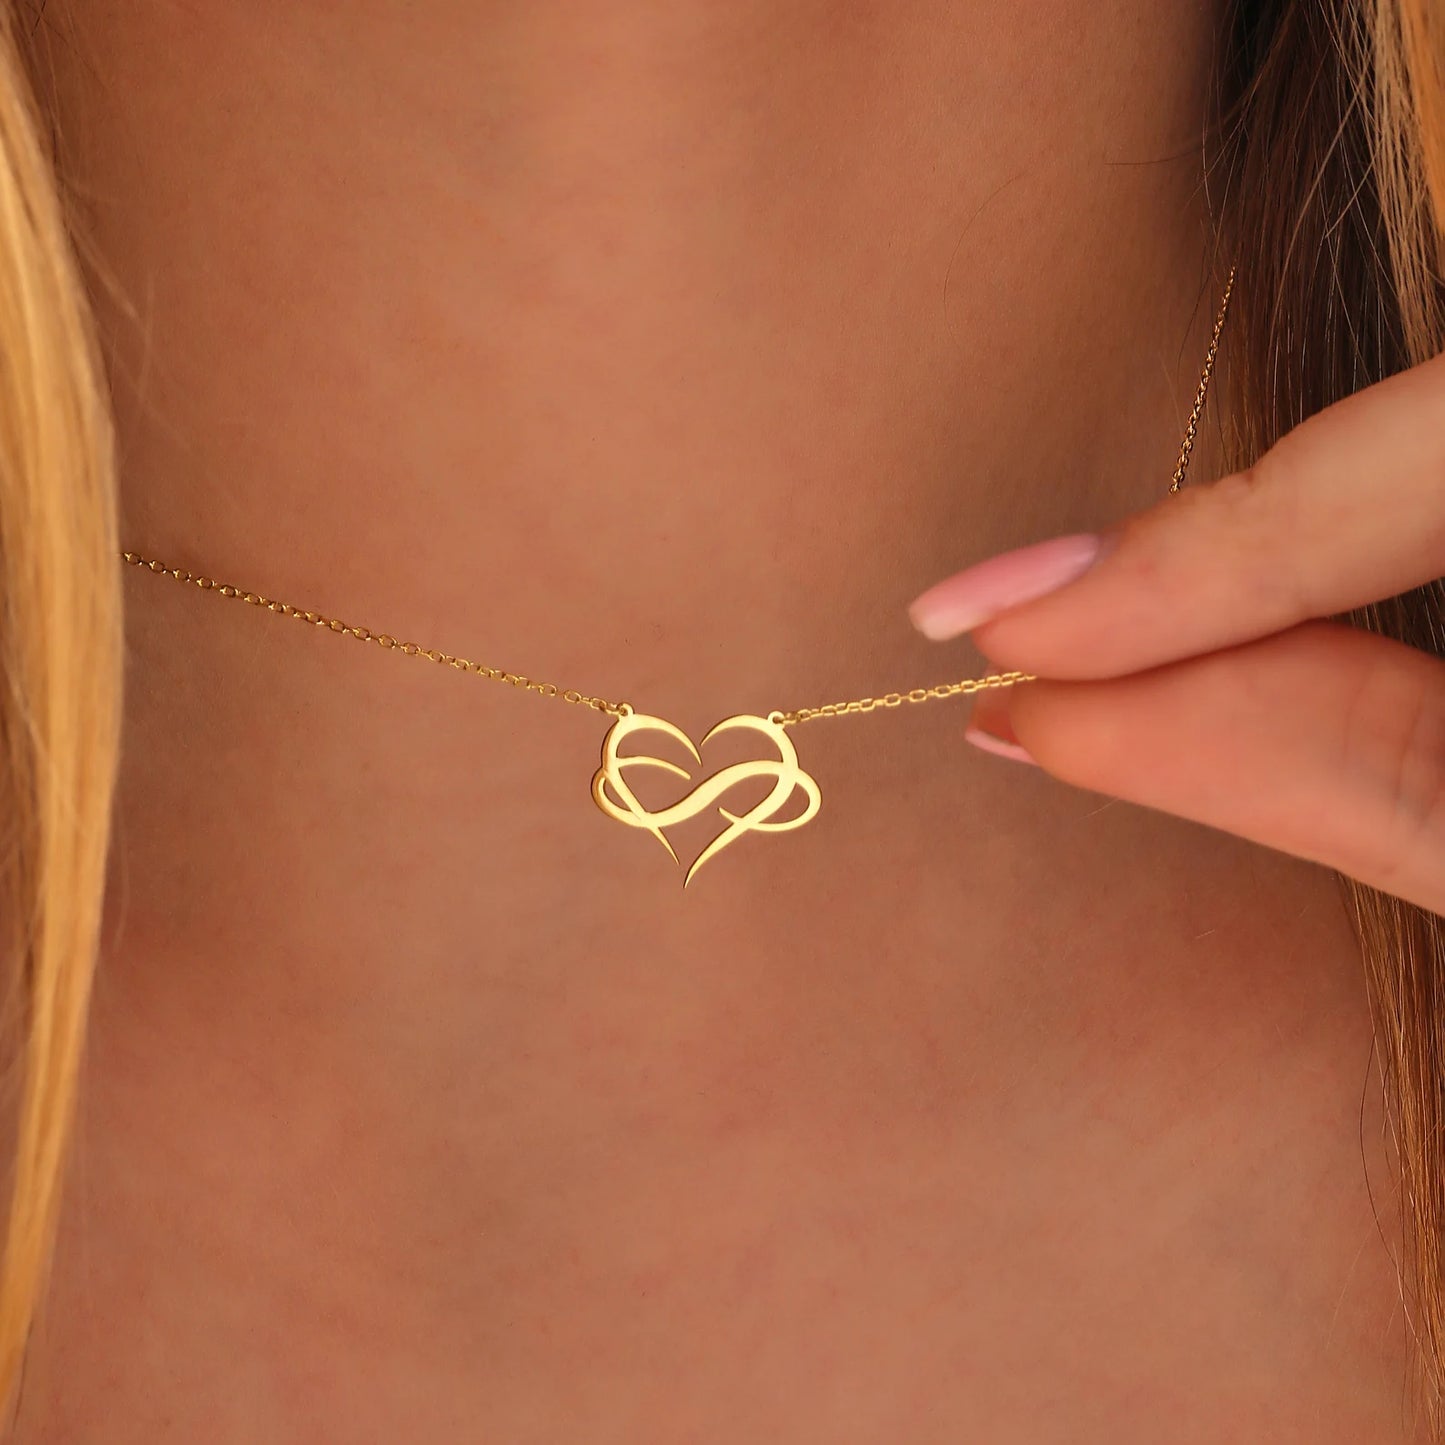 18 Carat Gold Heart Infinity Necklace - A Radiant Emblem of Eternal Connection